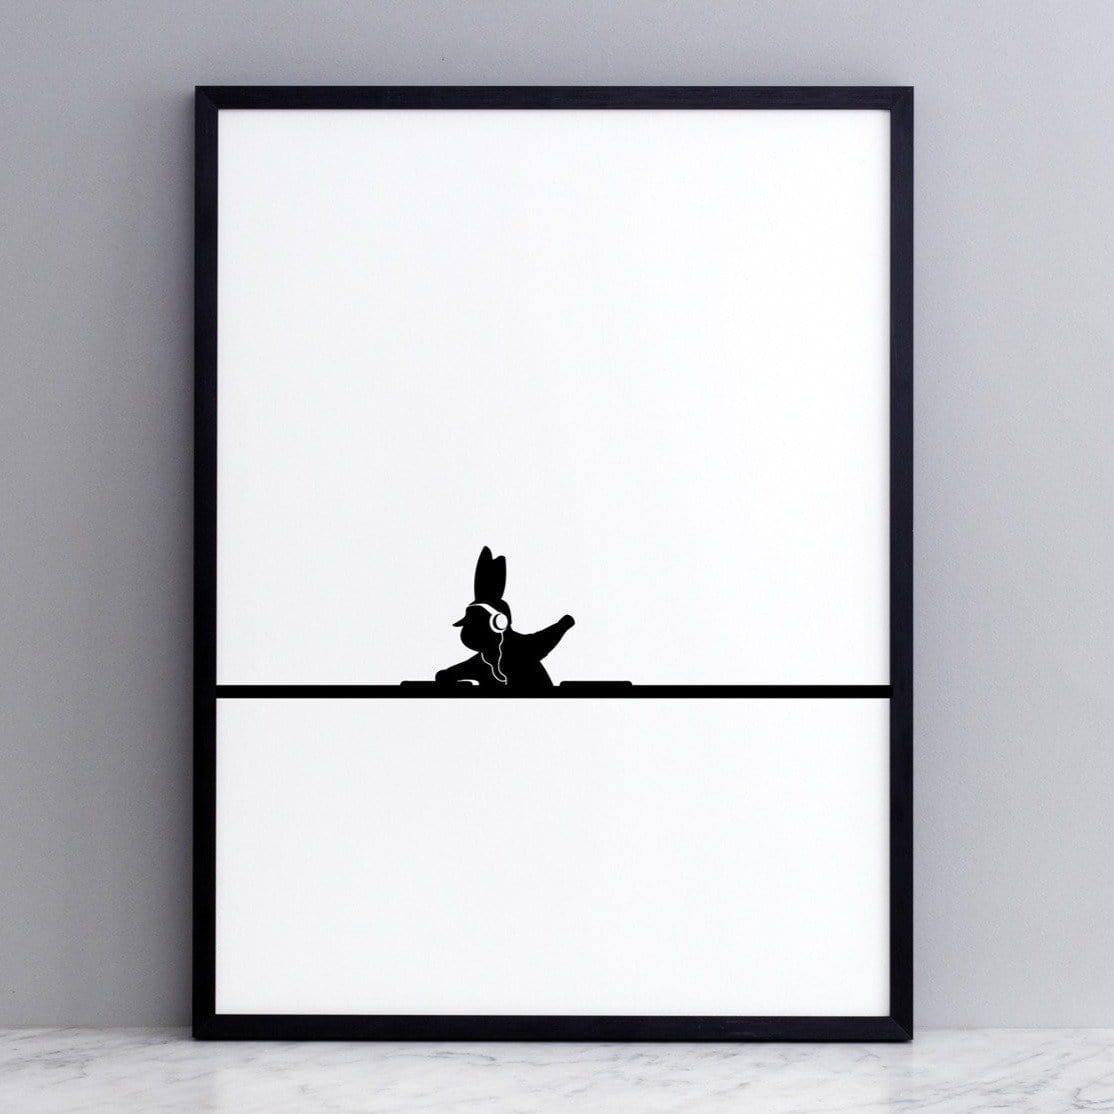 black and white image of HAM rabbit mixing records.  Fun and playful series of prints.  Ideal for adults and children. Pictured here on marble surface with grey painted wall backdrop.